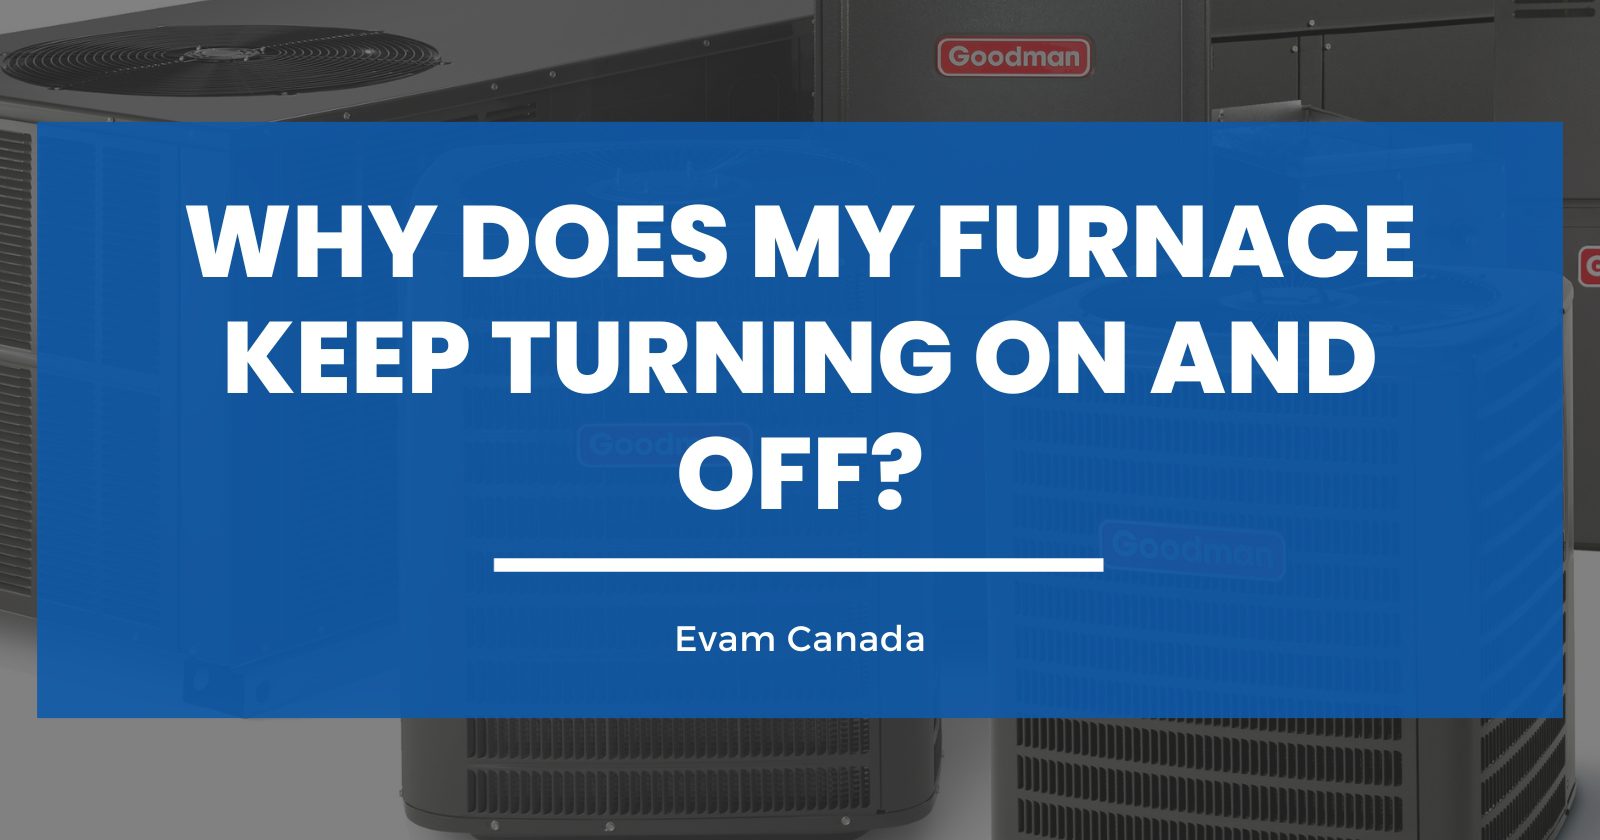 Why Does My Furnace Keep Turning On and Off?